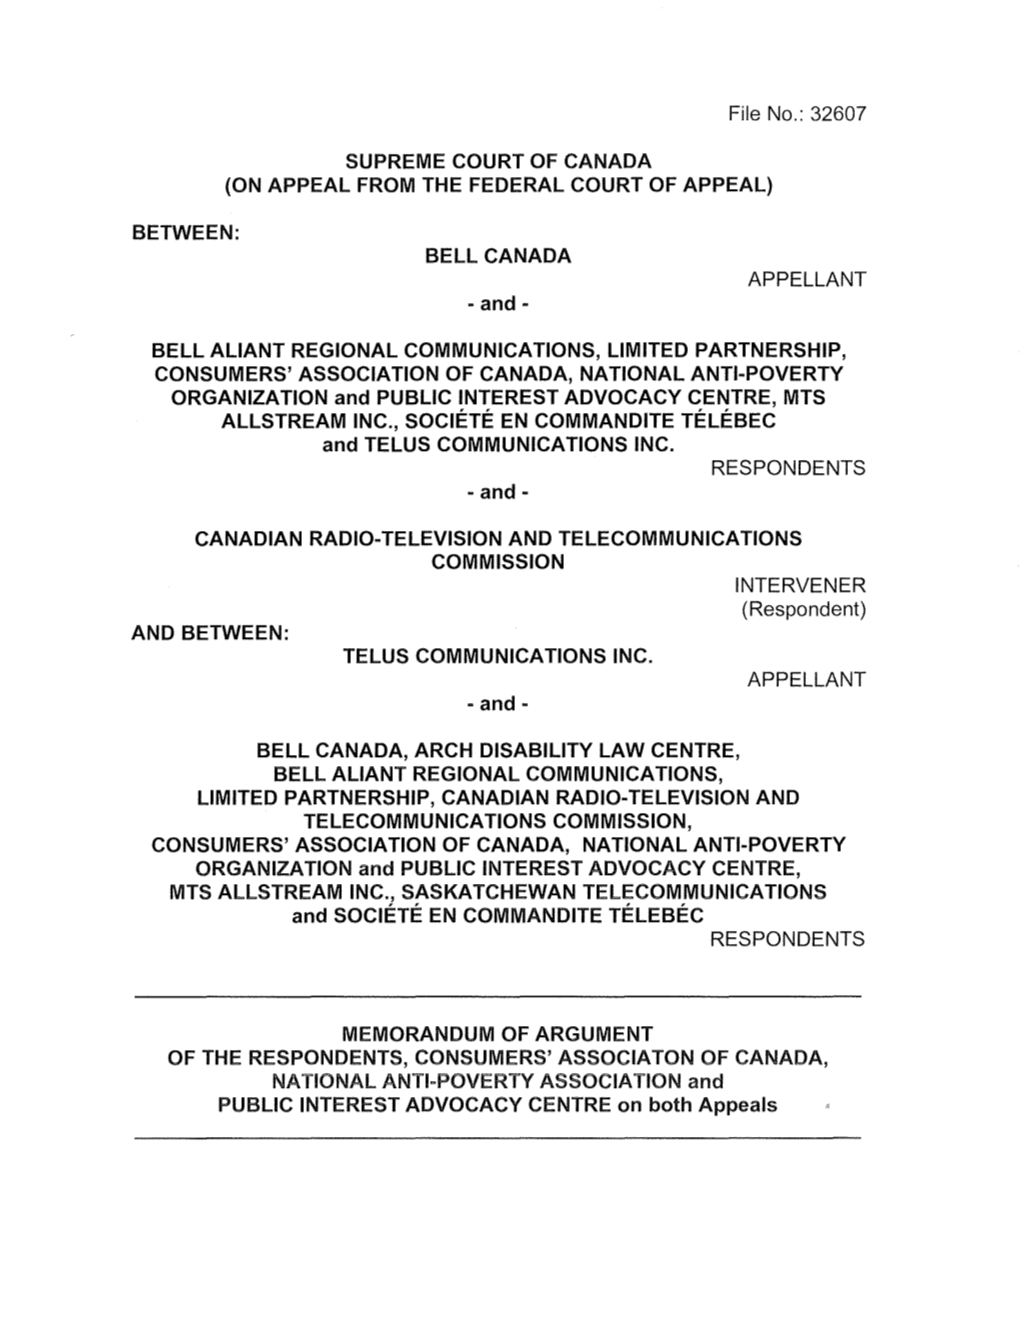 File No.: 32607 SUPREME COURT of CANADA (ON APPEAL FROM